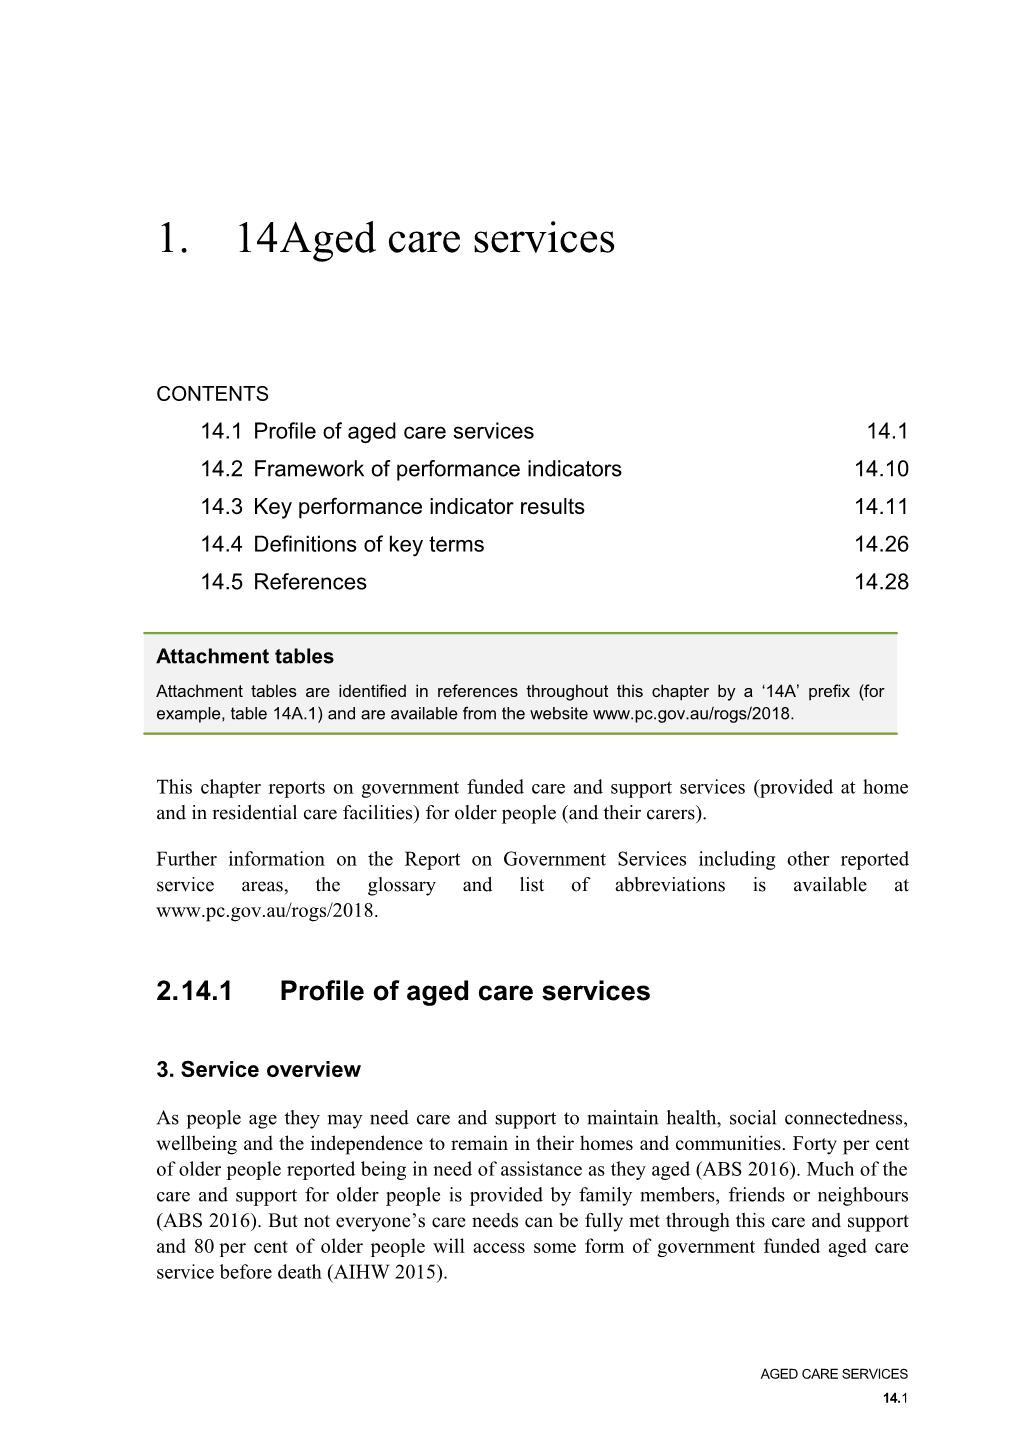 Chapter 14 Aged Care Services - Report on Government Services 2018